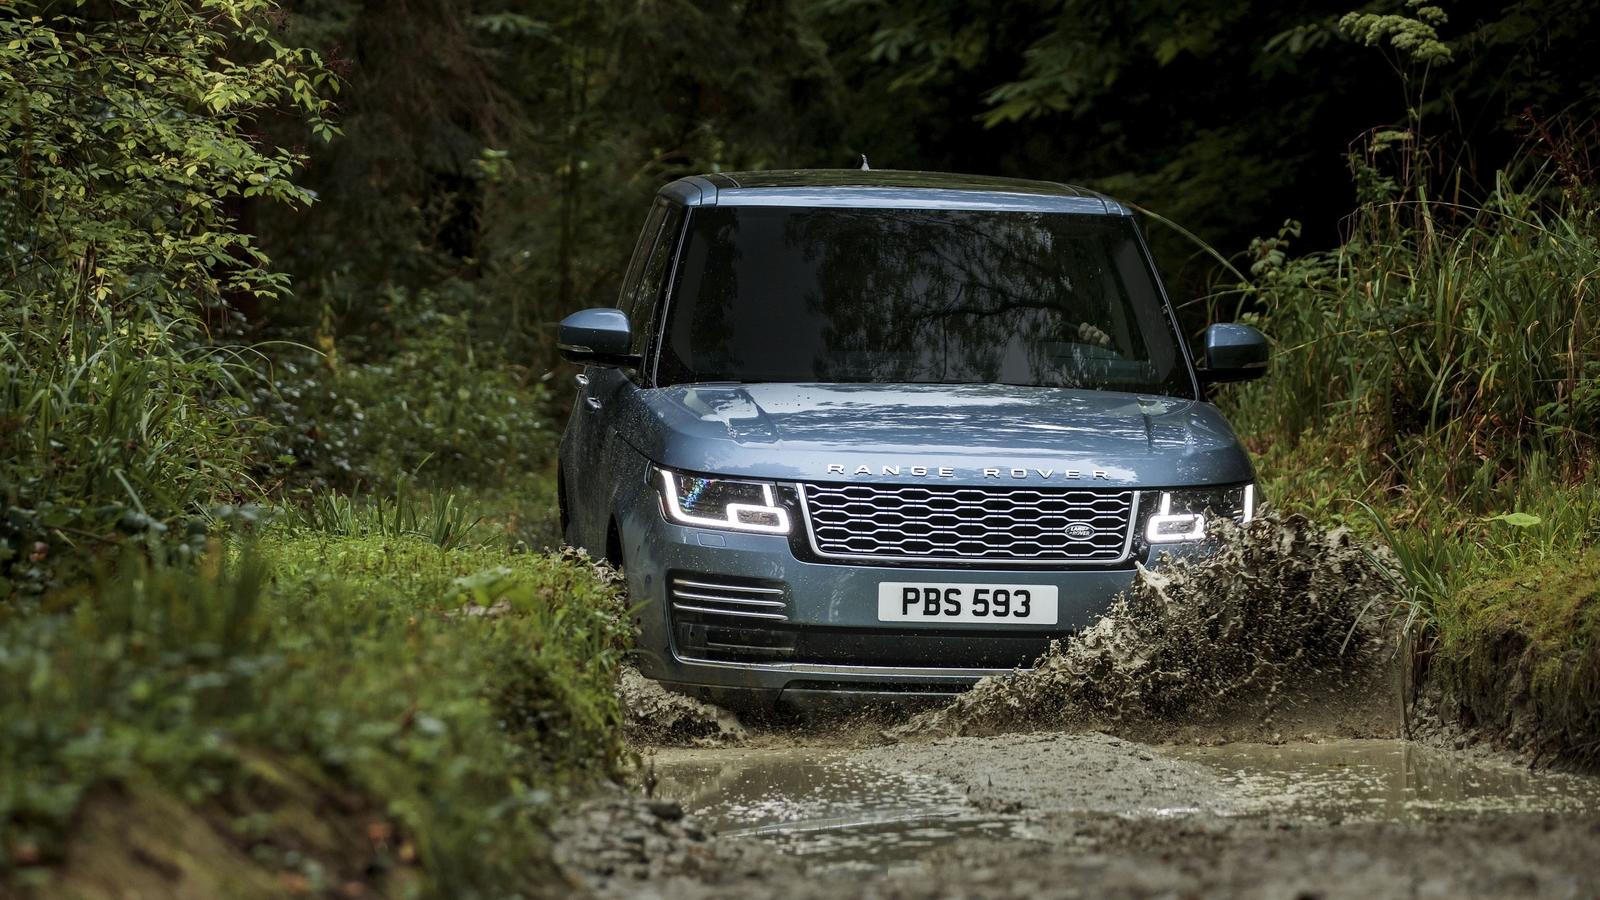 Wallpaper Of The Day: 2018 Land Rover Range Rover